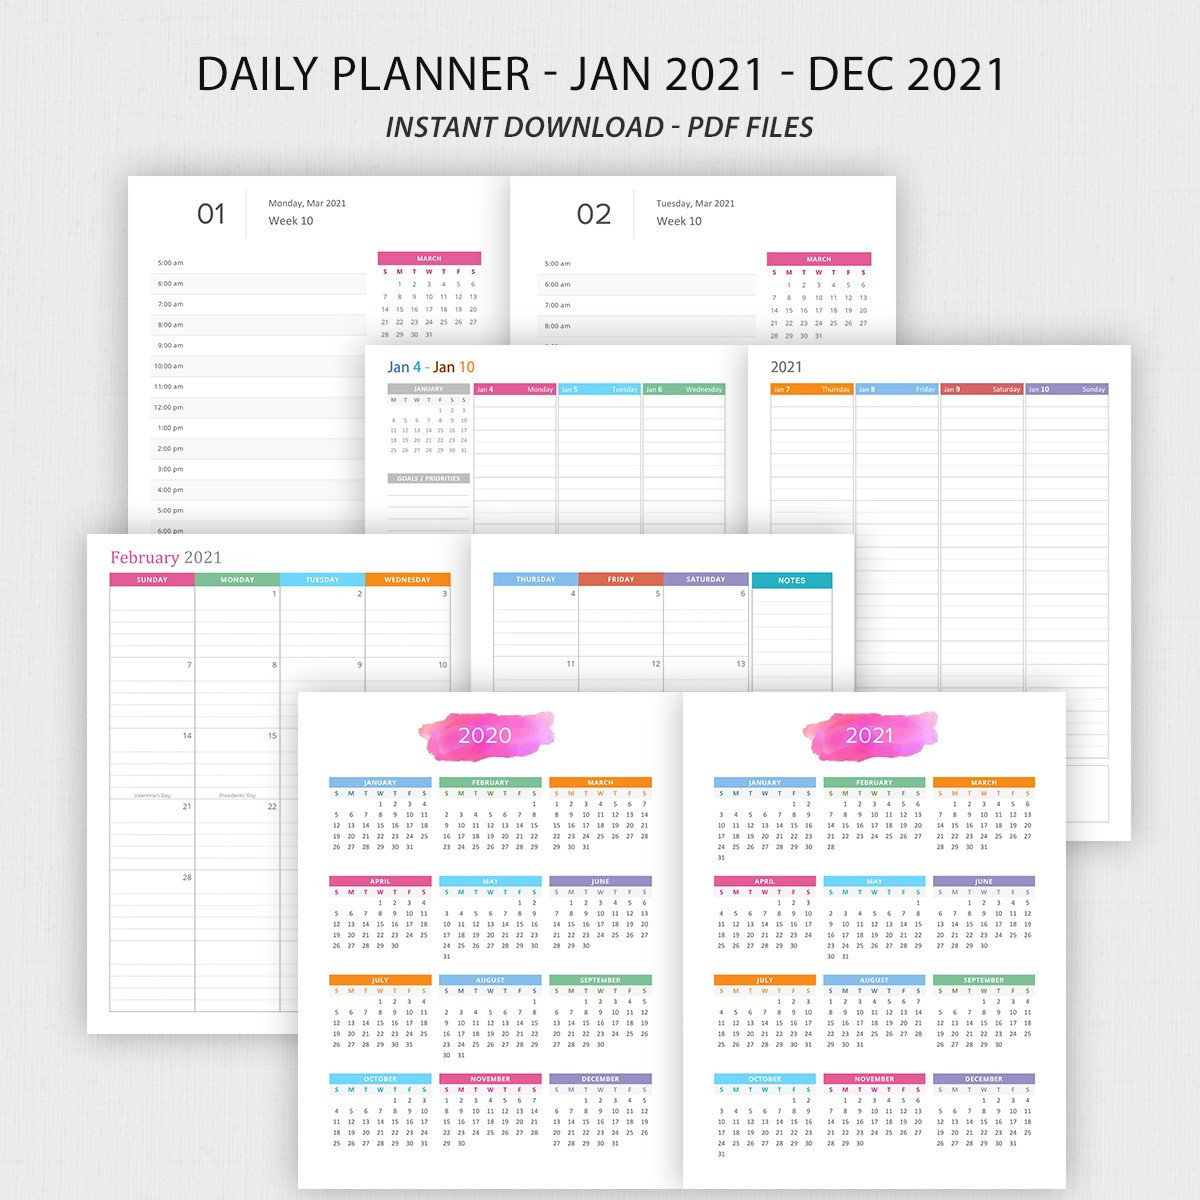 2021 Daily Planner Printable - Daily, Weekly And Monthly Planners-Printable Monthly Planners For 2021